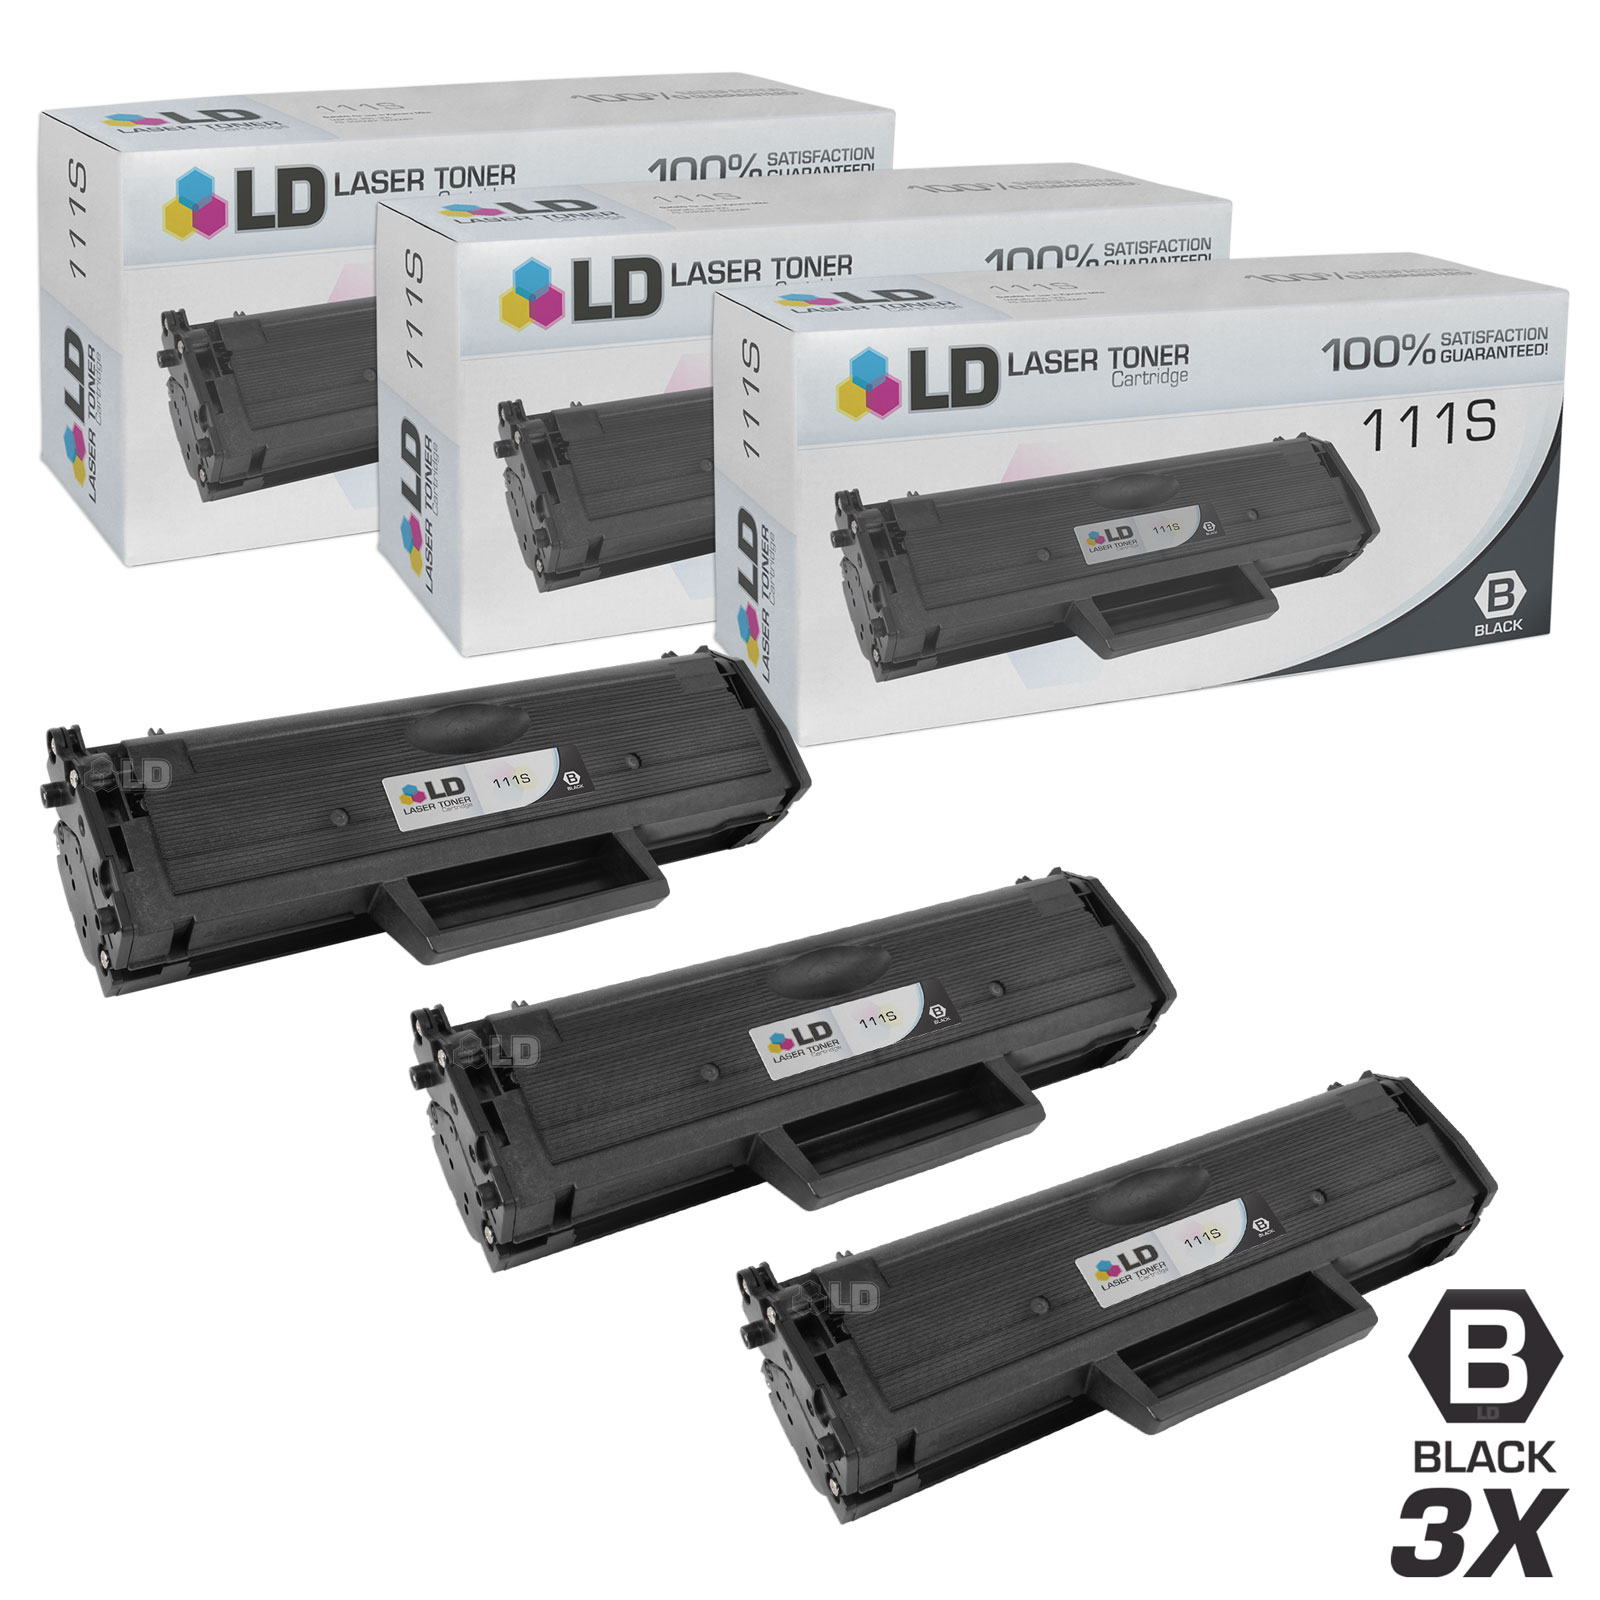 Compatible Replacements for Samsung MLT-D111S Set of 3 Black Laser Toner Cartridges for use in Samsung Xpress M2020W, and M2070FW s - image 1 of 1